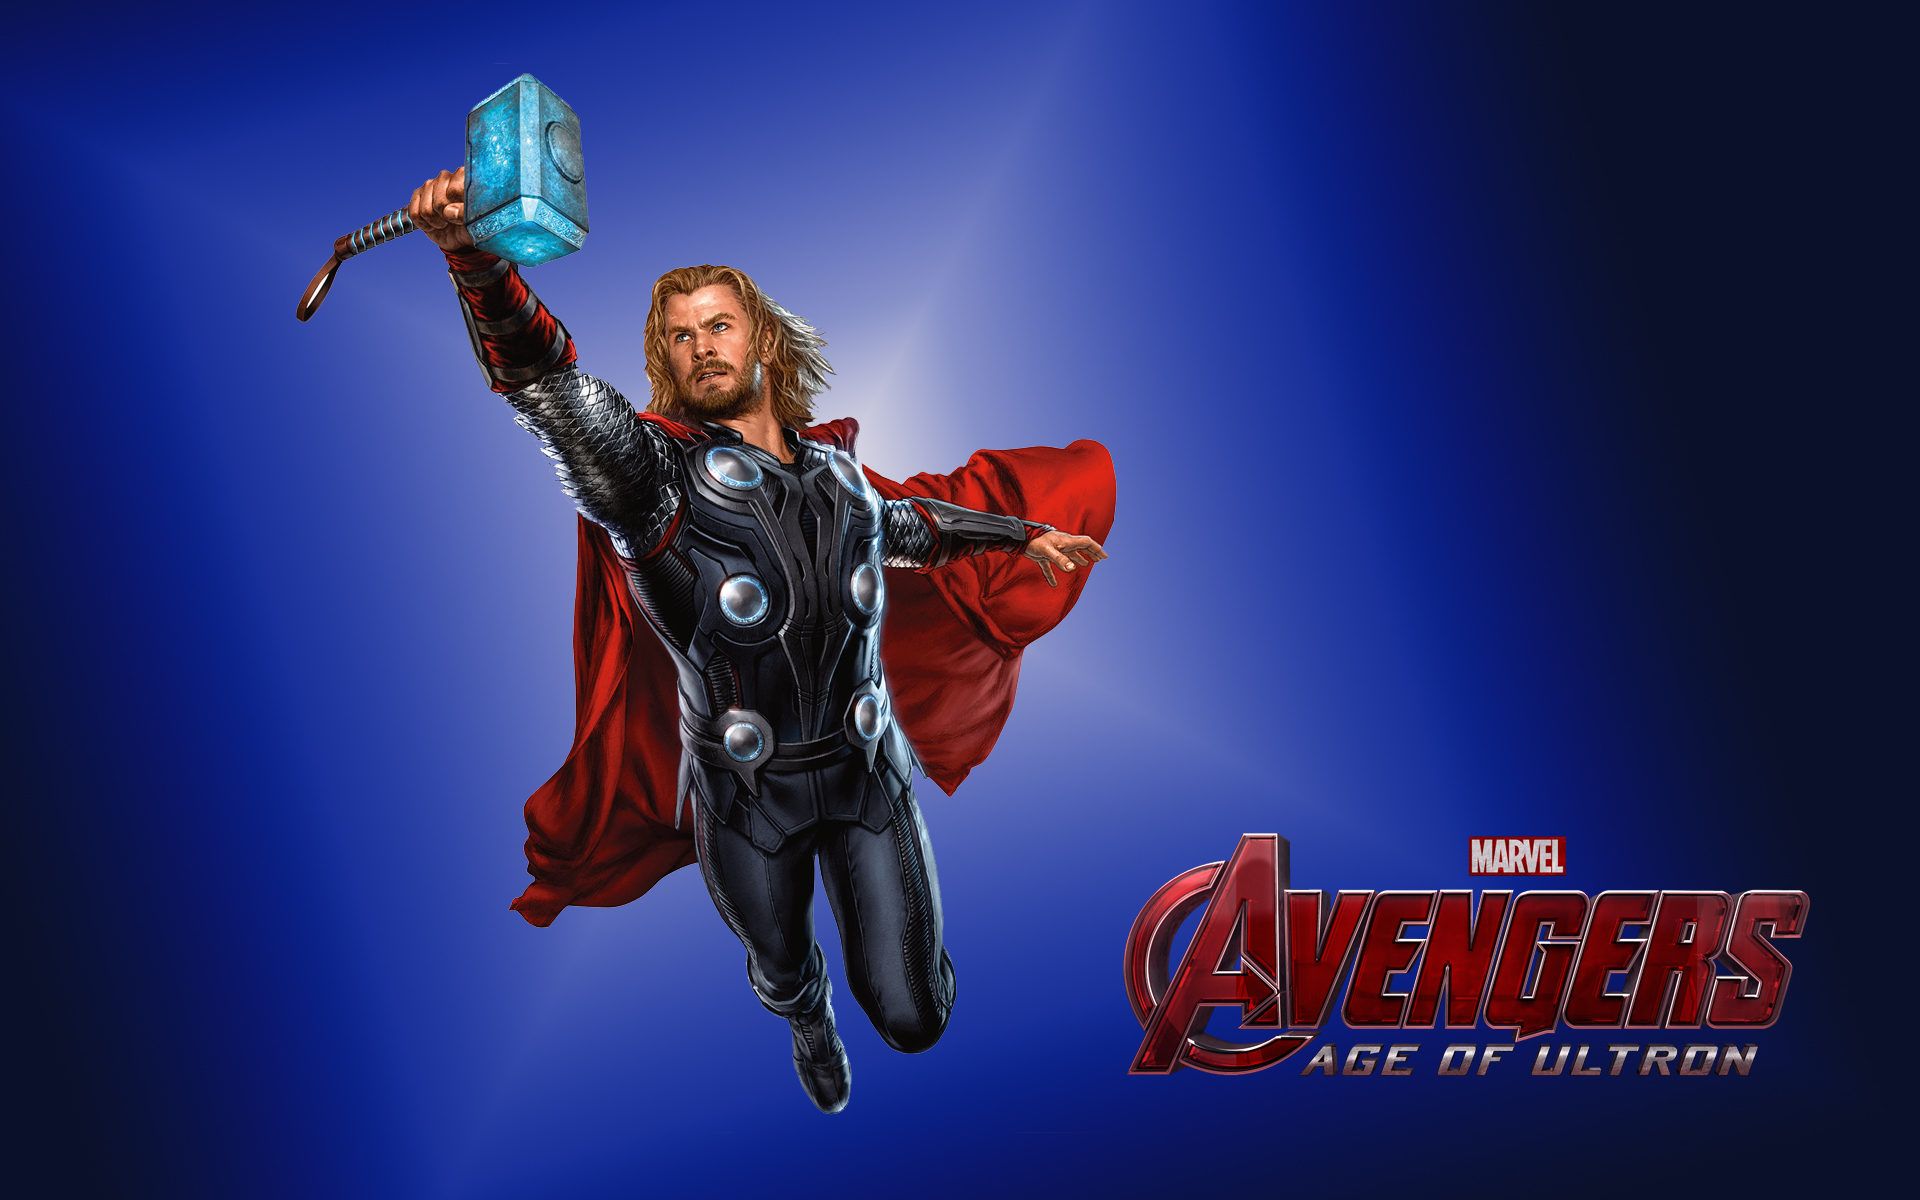 Thor with his hammer in hand - Thor